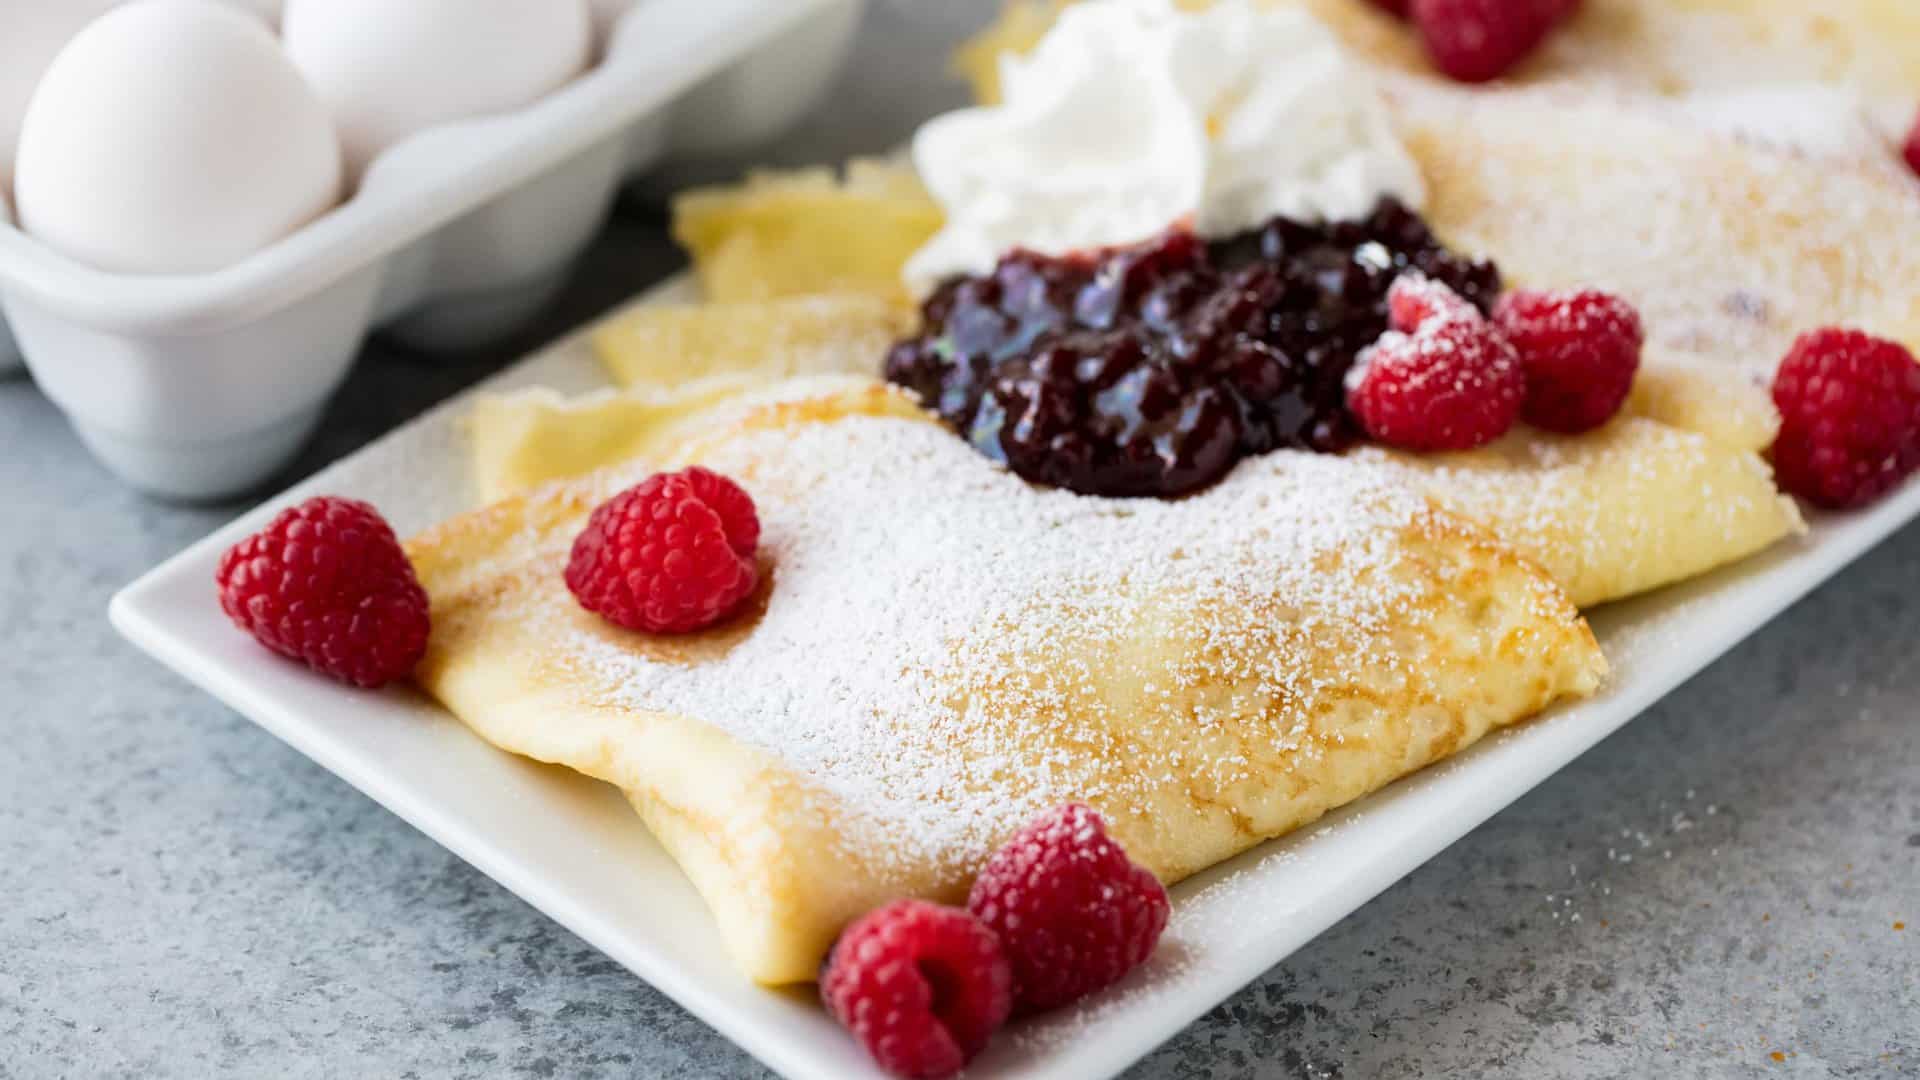 Fluffy Swedish Pancakes on a white plate. Topped with berries and powdered sugar.